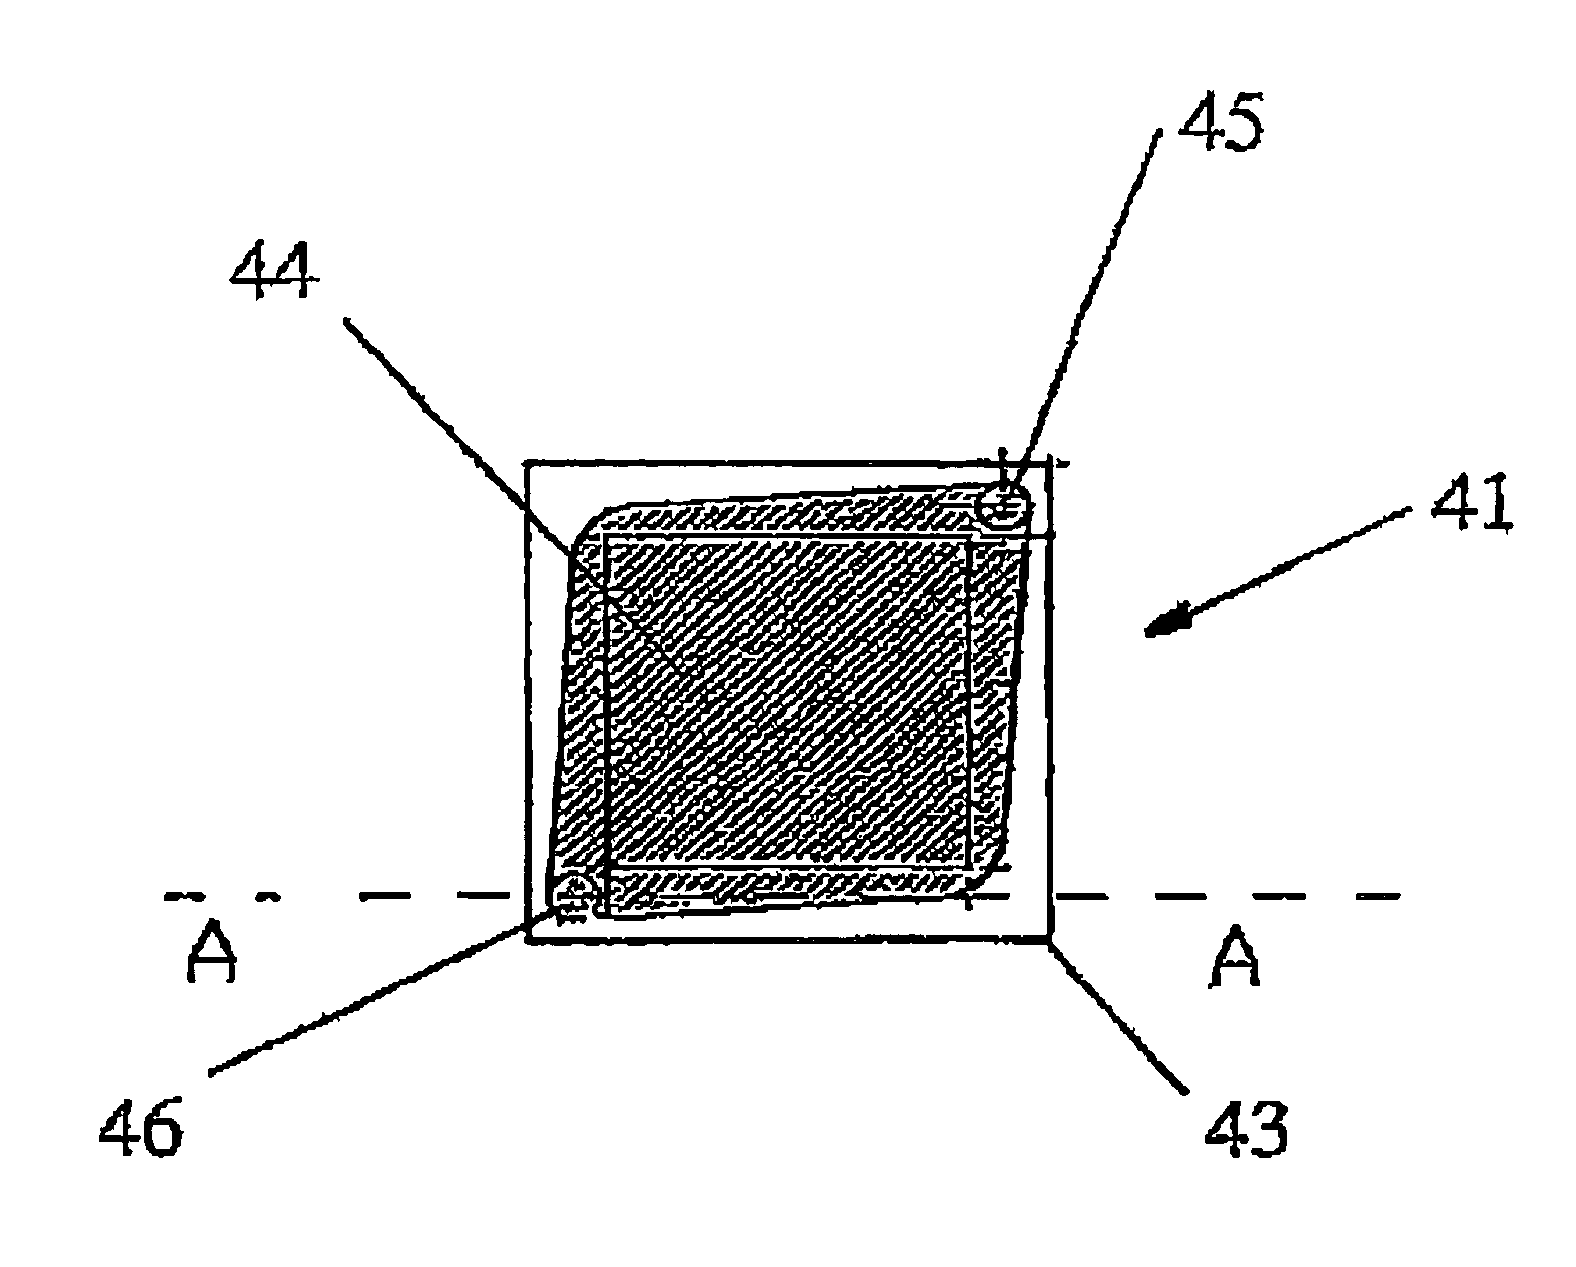 Reference device for evaluating the performance of a confocal laser scanning microscope, and a method and system for performing that evaluation